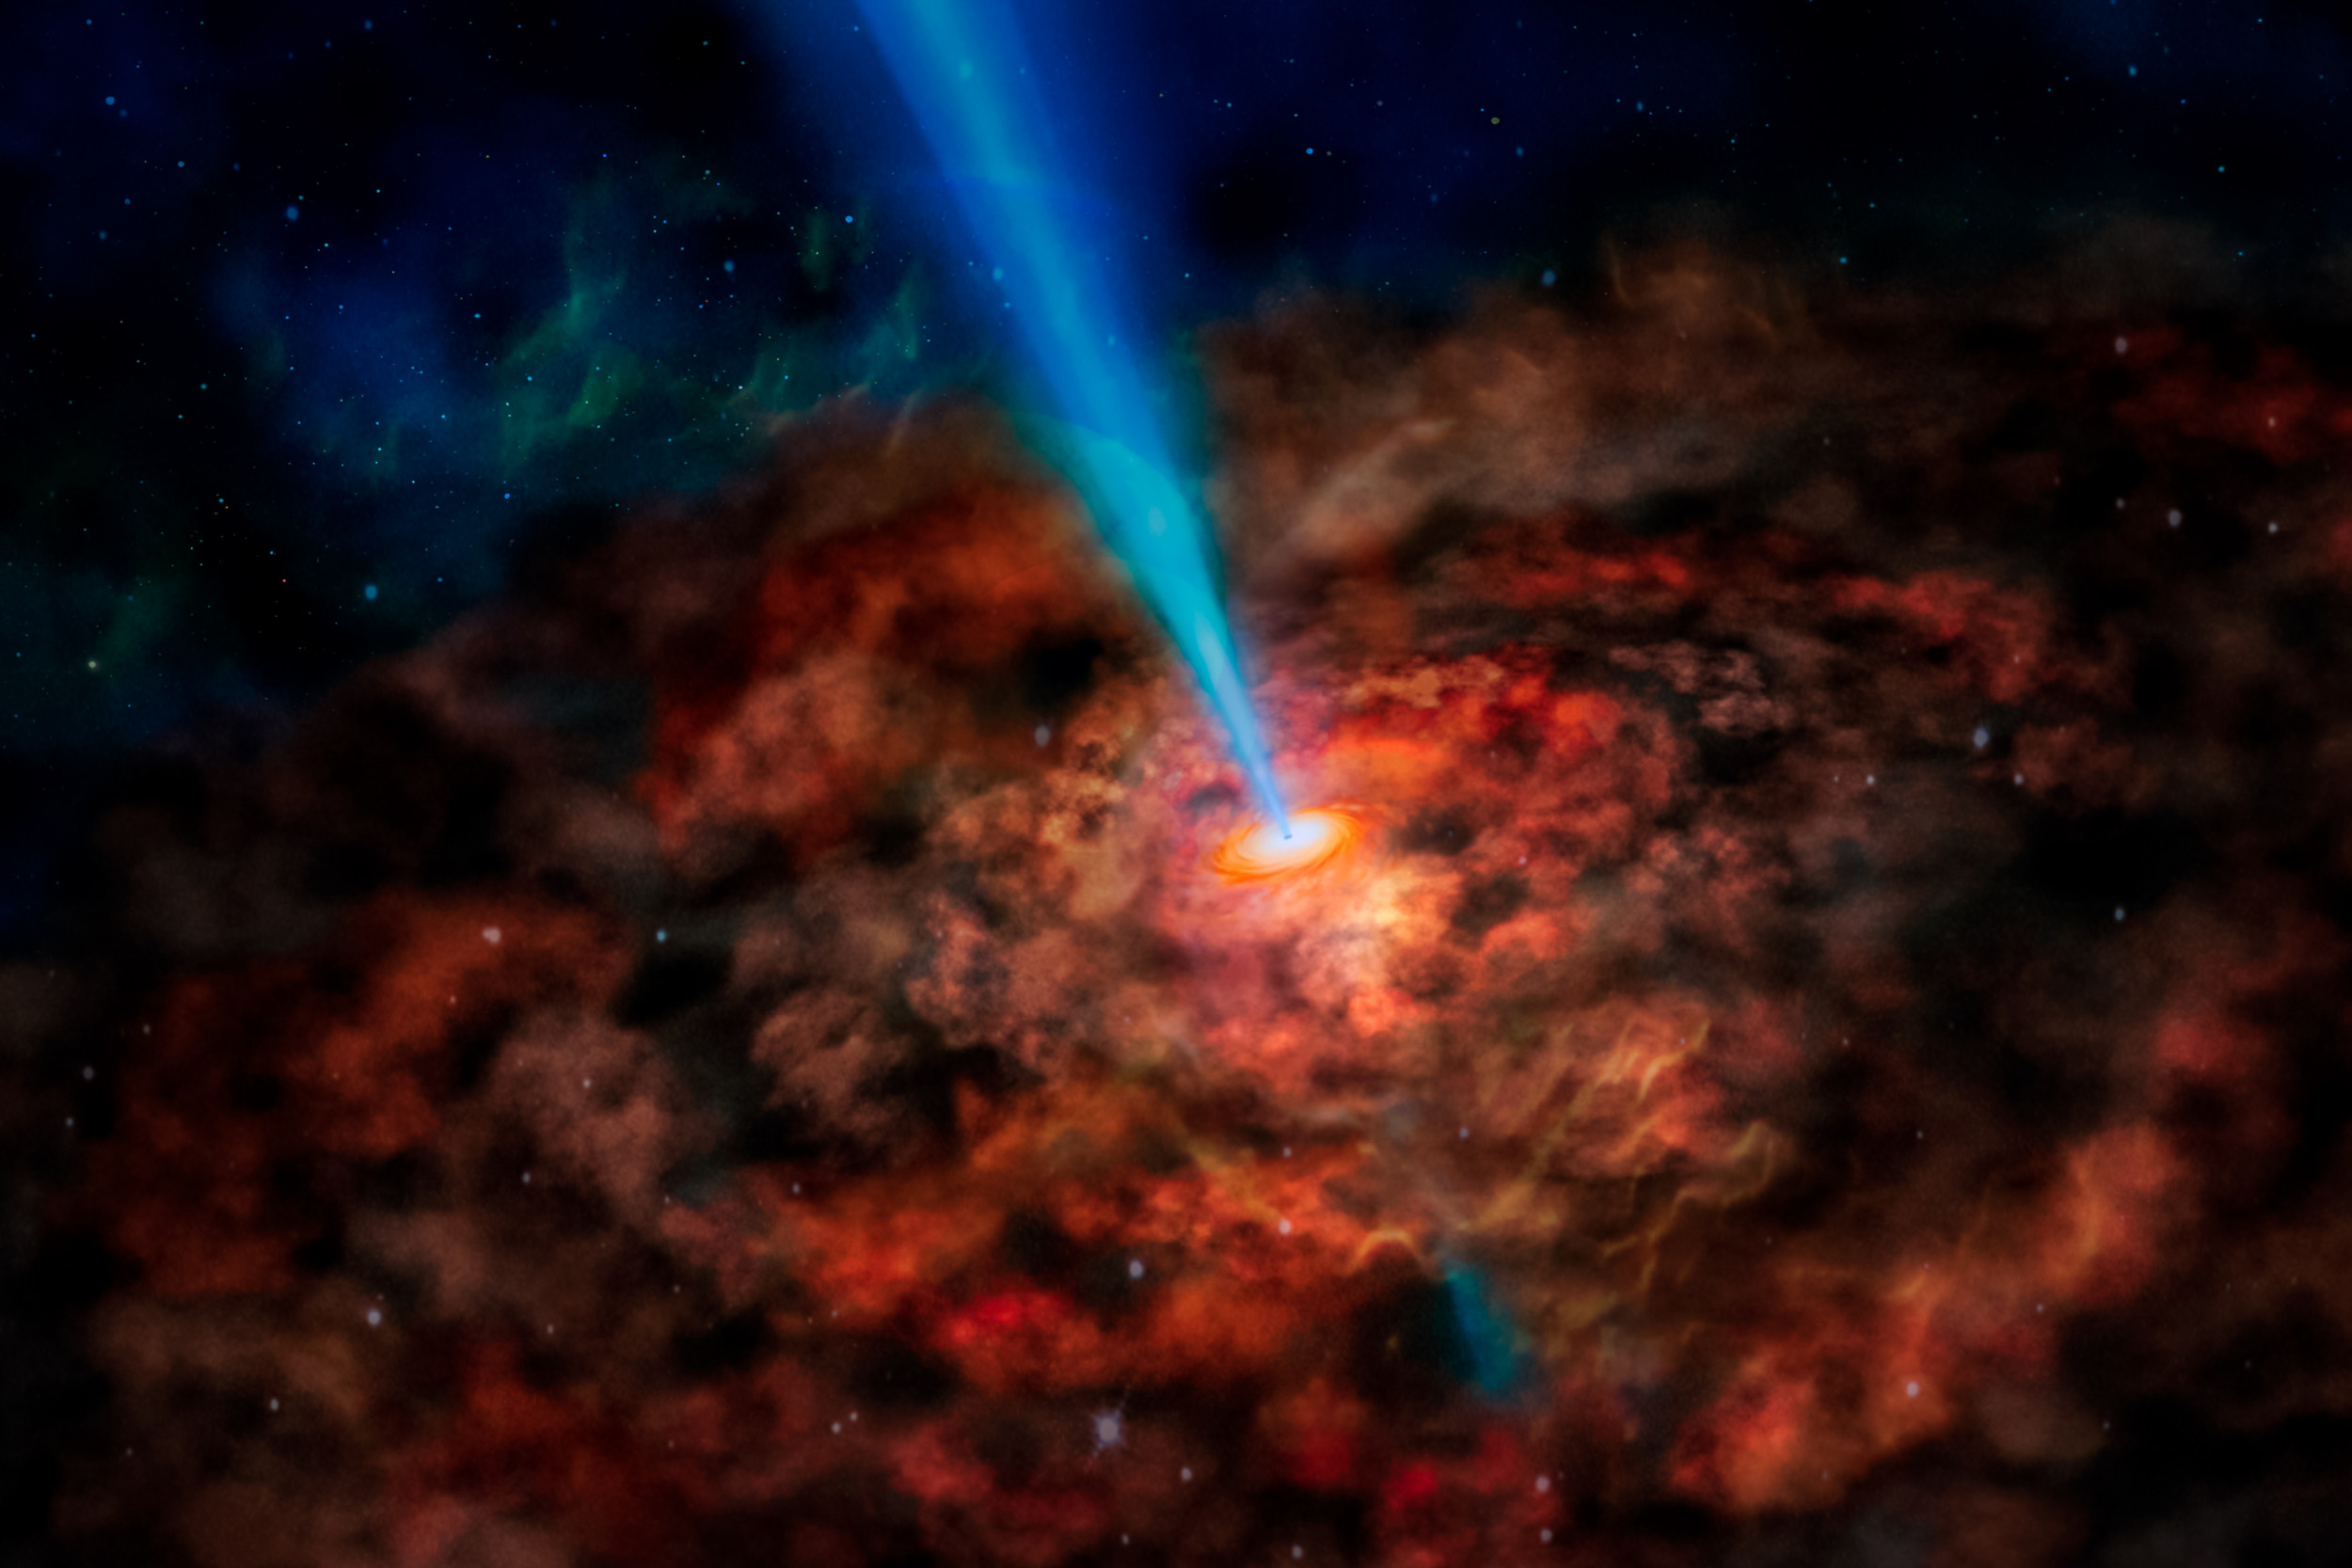 Image Of Black Hole At Center Of Milky Way